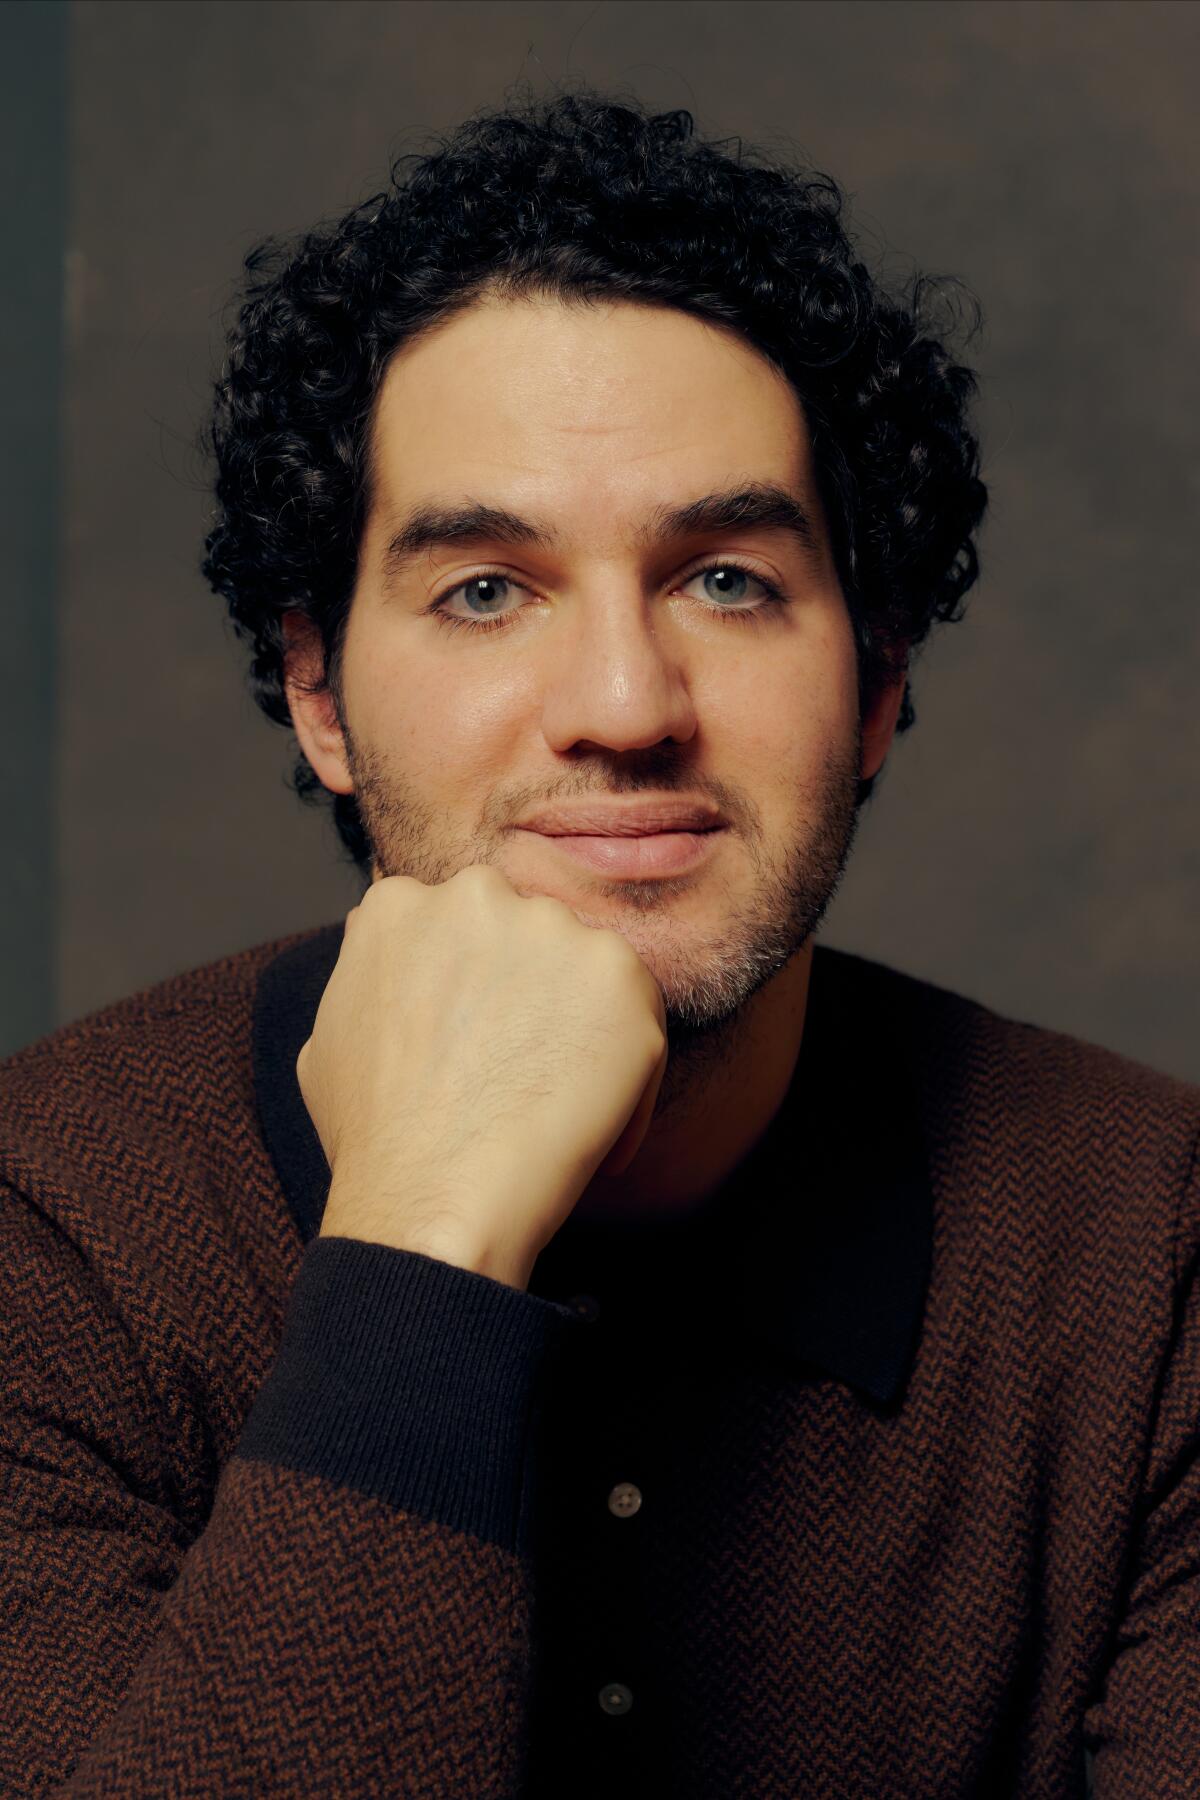 A man in a dark shirt, with dark curly hair, rests his chin on his hand and smiles slightly